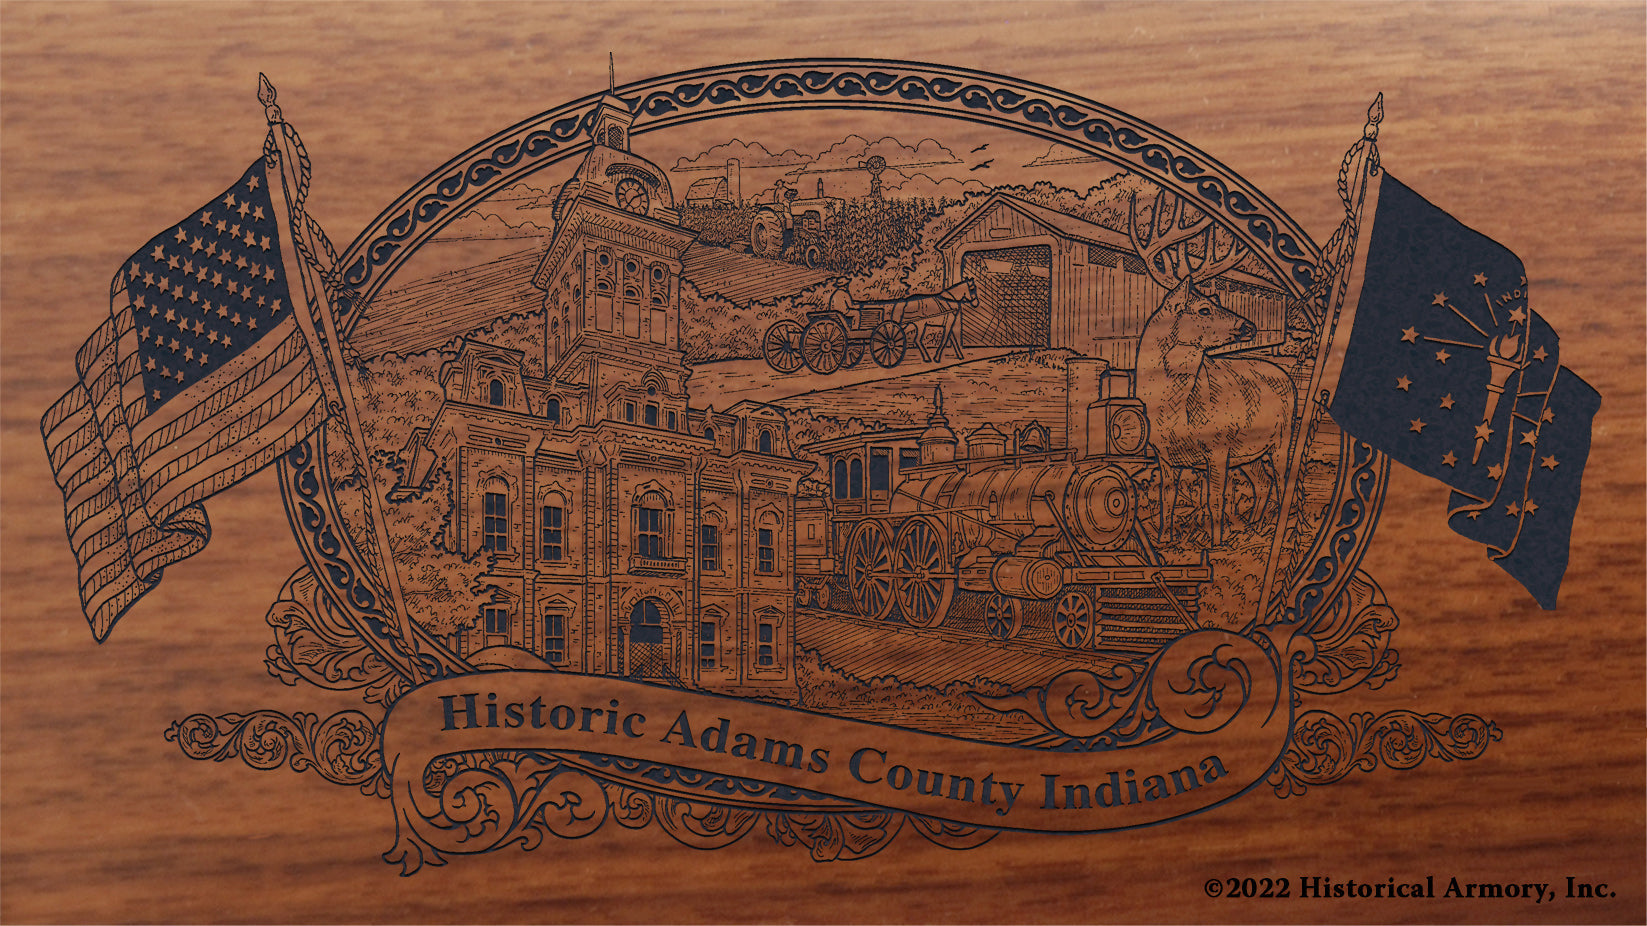 Adams County Indiana Engraved Rifle Buttstock